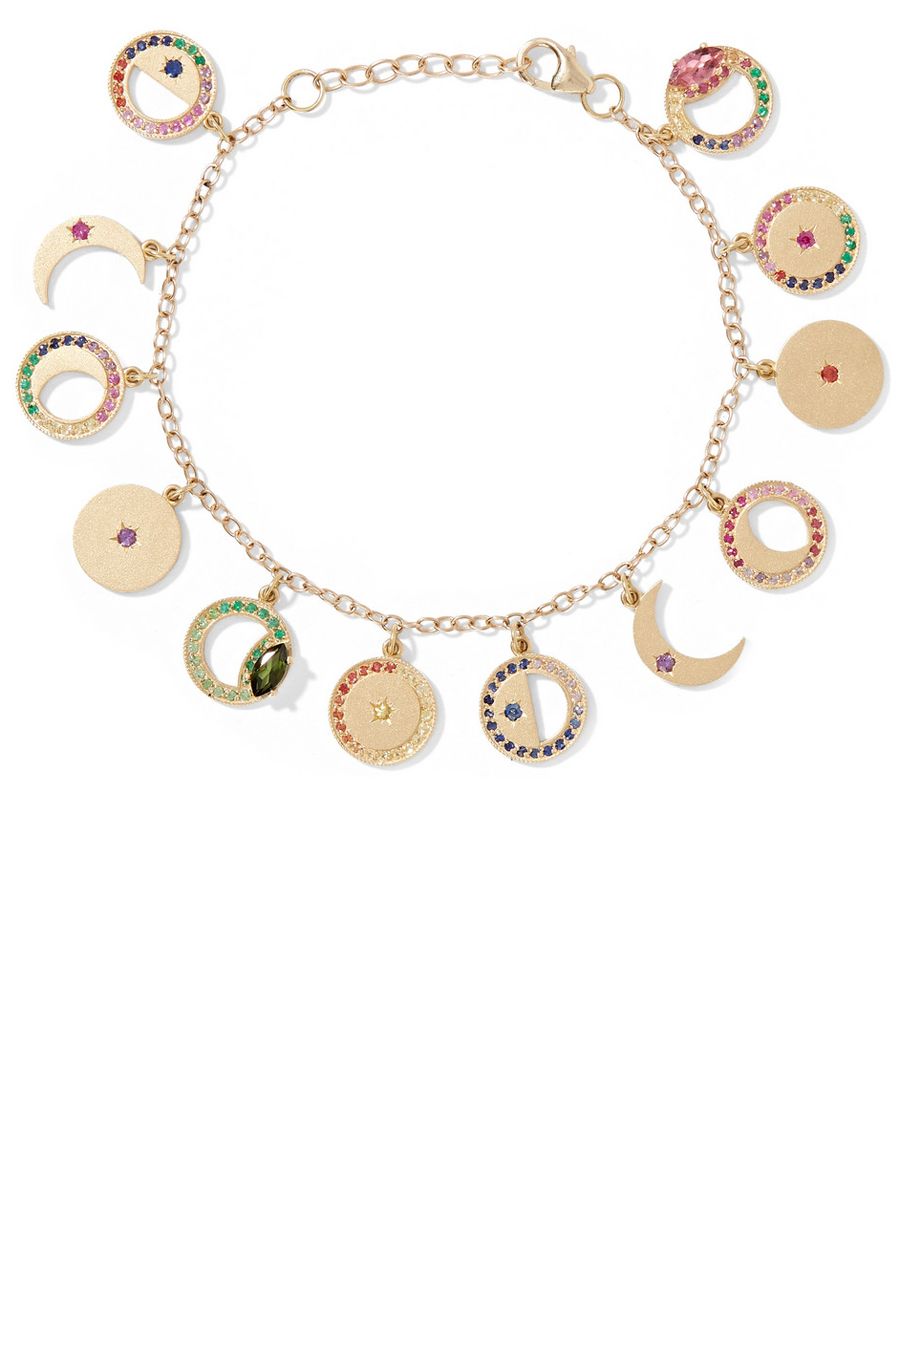 The Best Charm Jewels to Wear 2021 — Best Charm Bracelets and